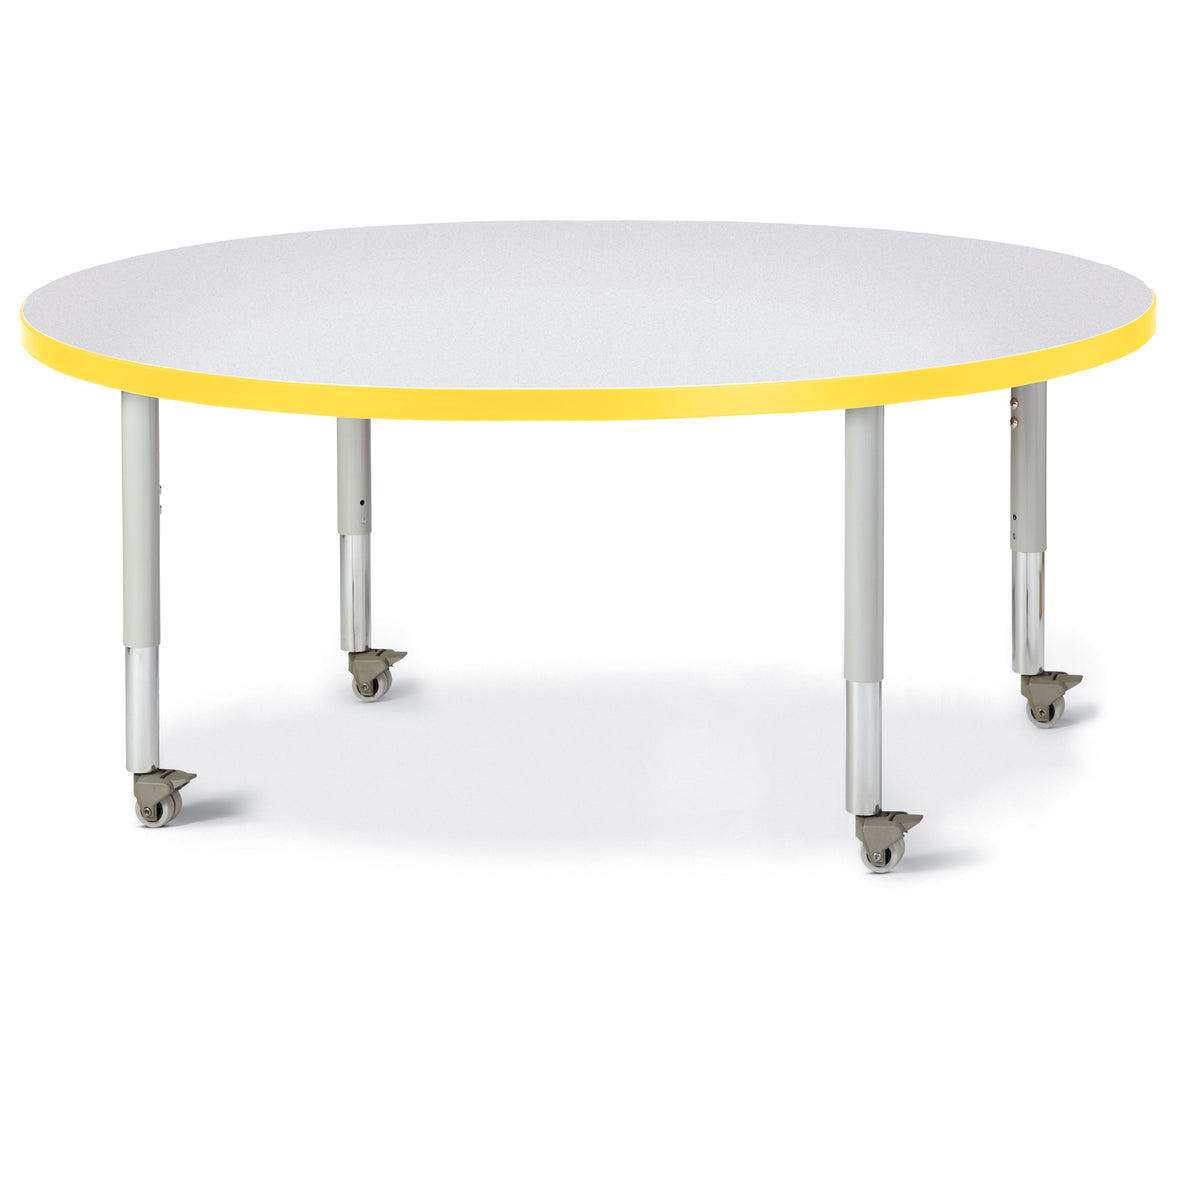 6433JCM007, Berries Round Activity Table - 48" Diameter, Mobile - Freckled Gray/Yellow/Gray